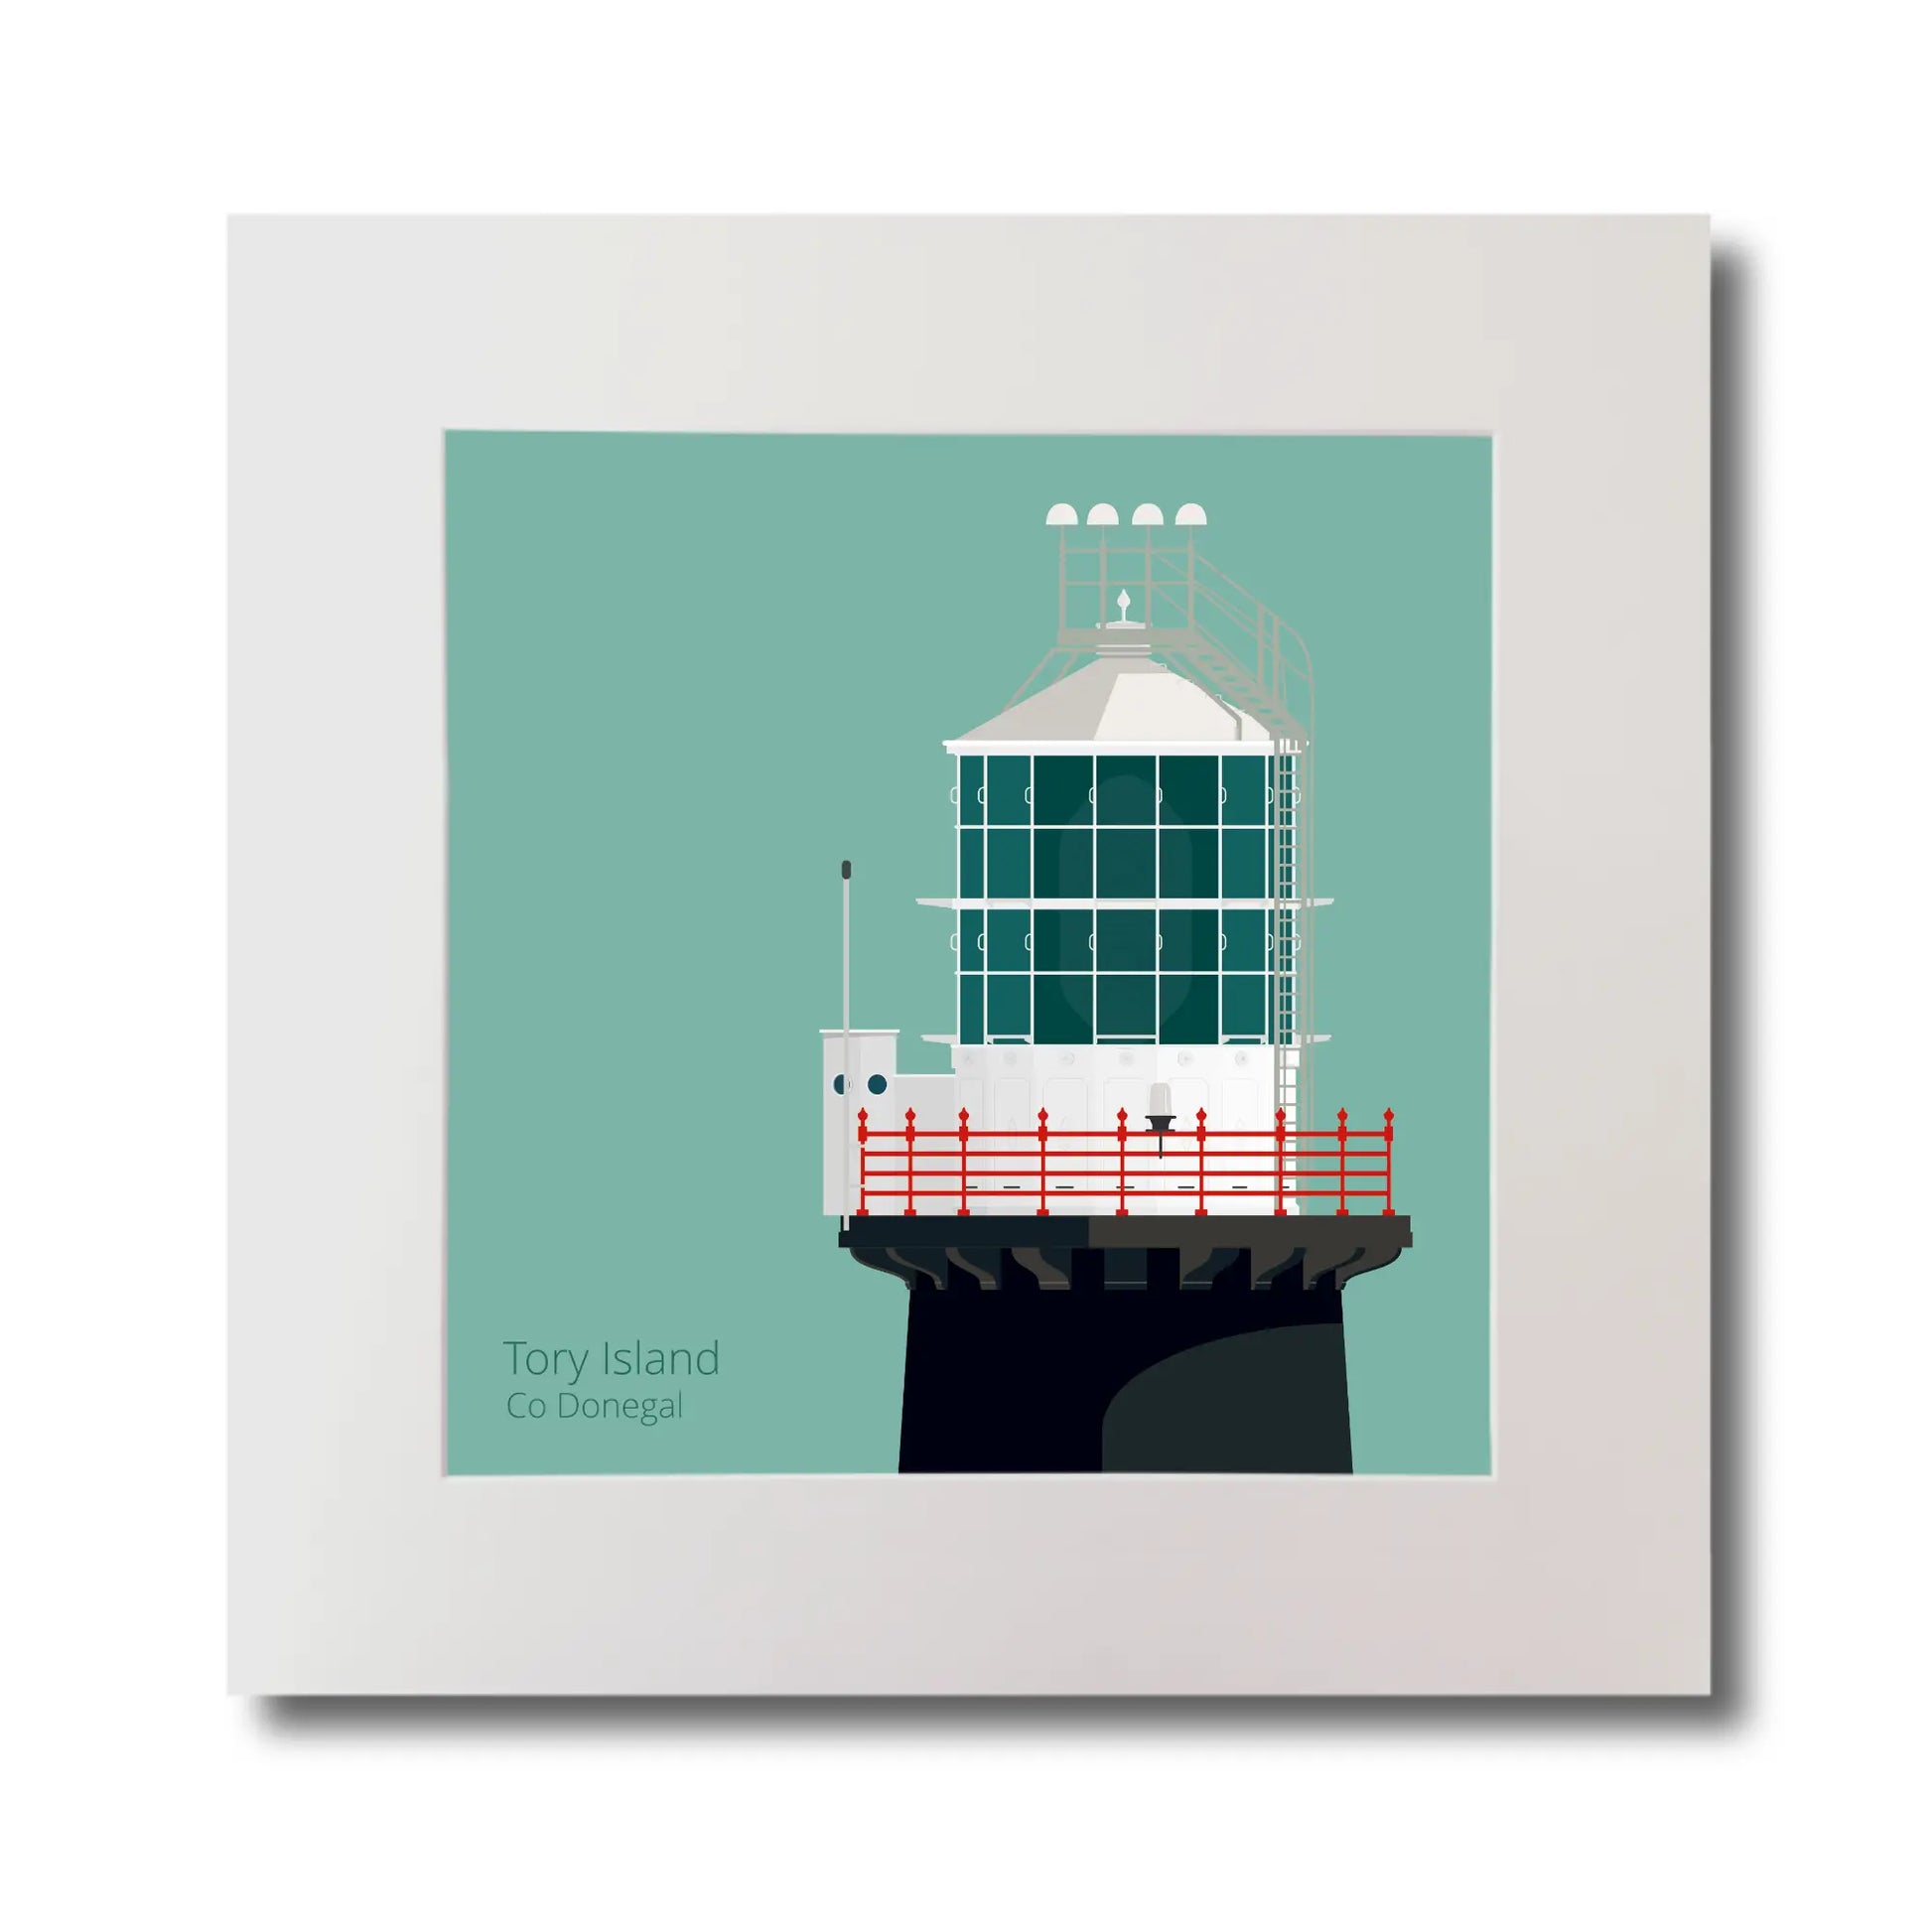 Illustration of Tory Island lighthouse on an ocean green background, mounted and measuring 30x30cm.